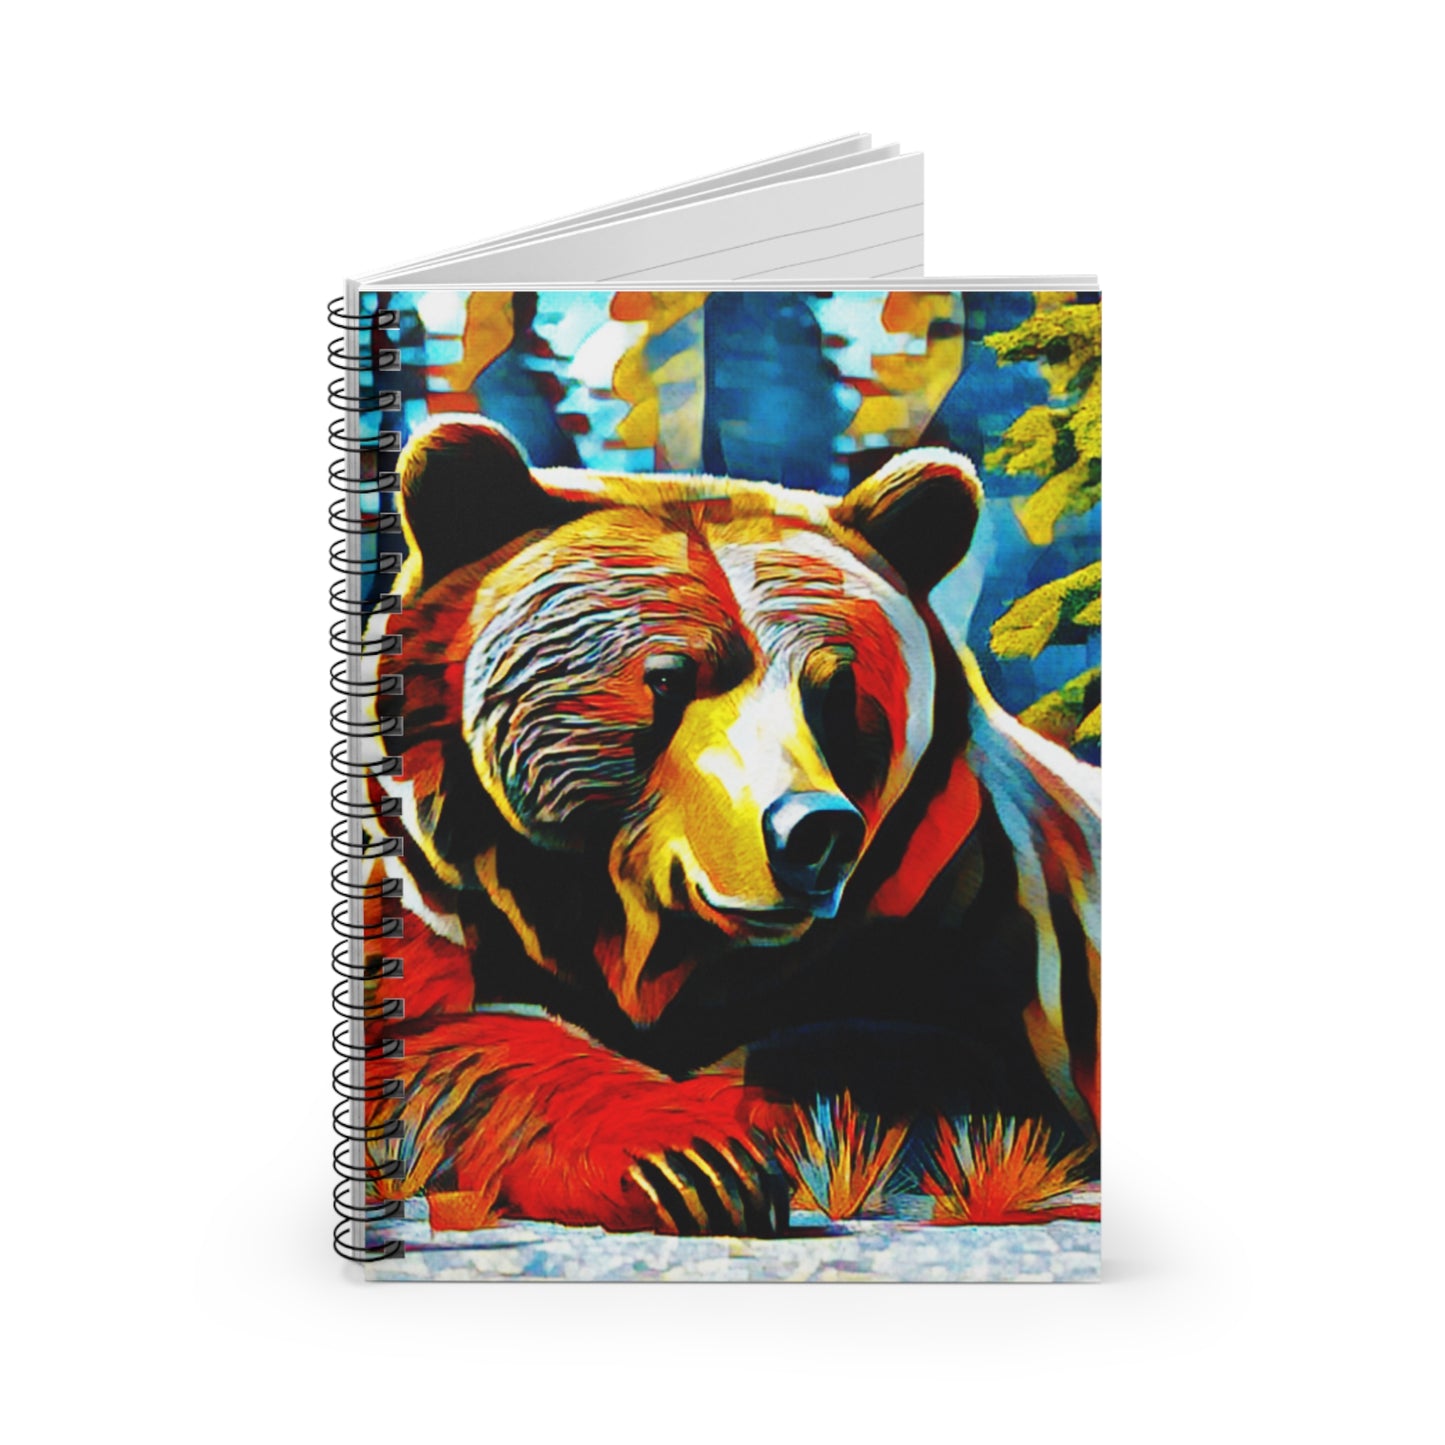 Grizzly Bear Artistic Spiral Journal Notebook - Ruled Line